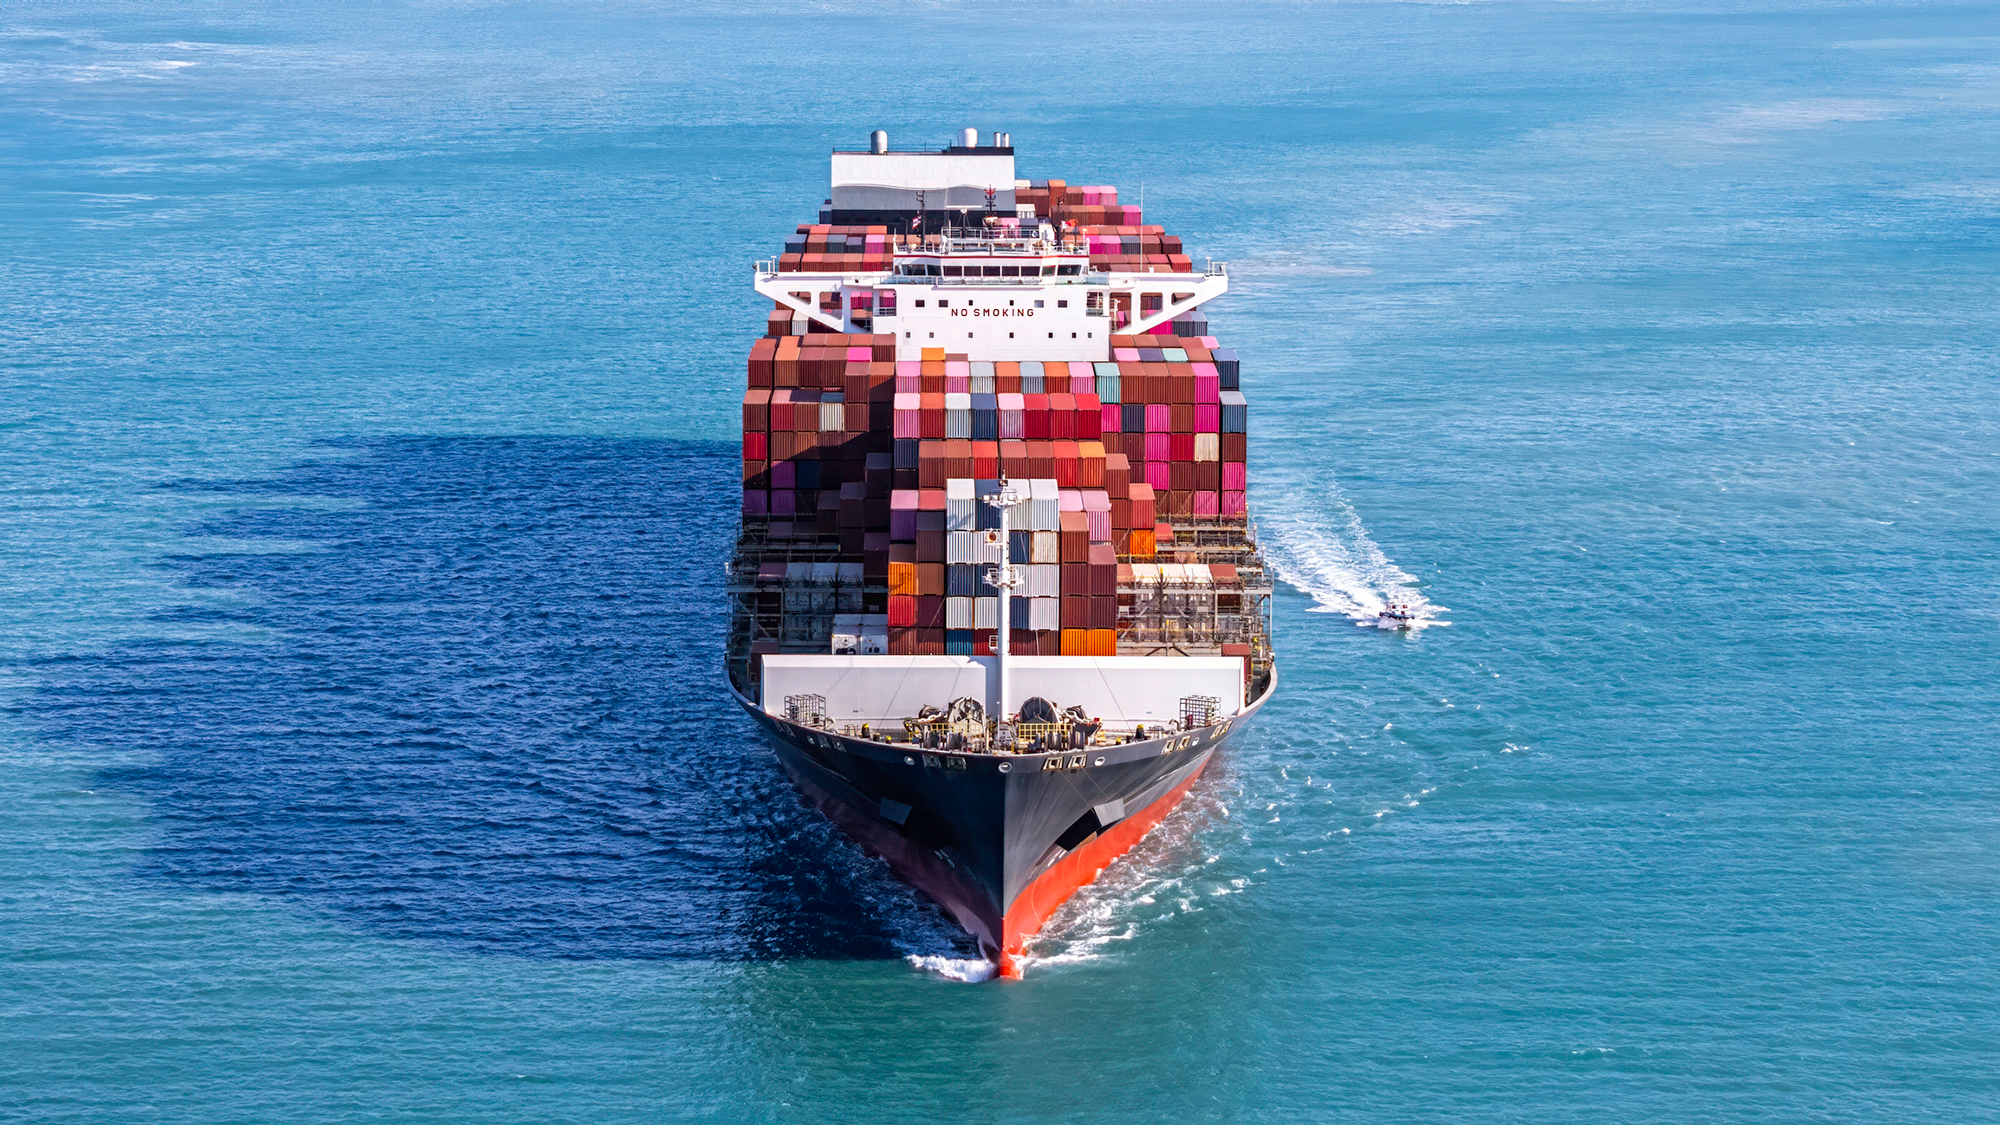 A cargo ship filled to the brim with colorful containers sails across a blue ocean